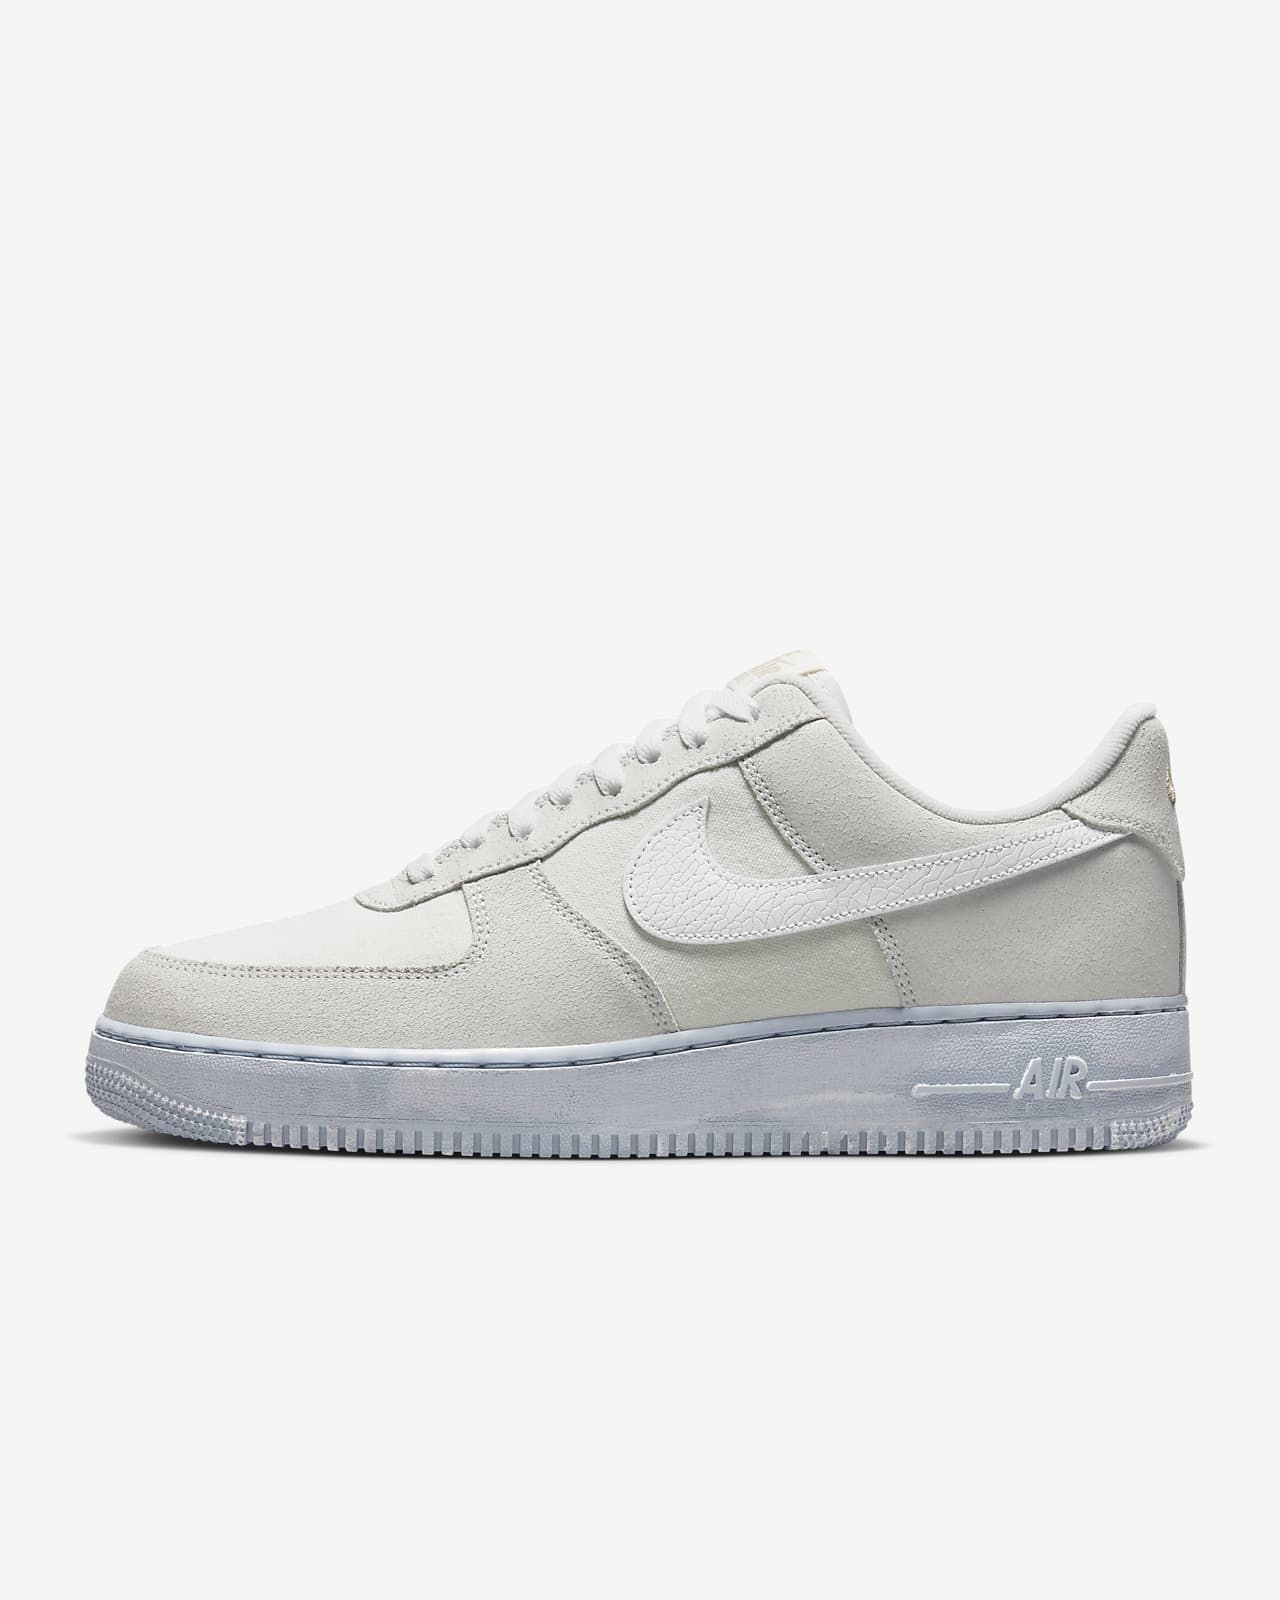 Nike Air Force 1 LV8 Shoes.